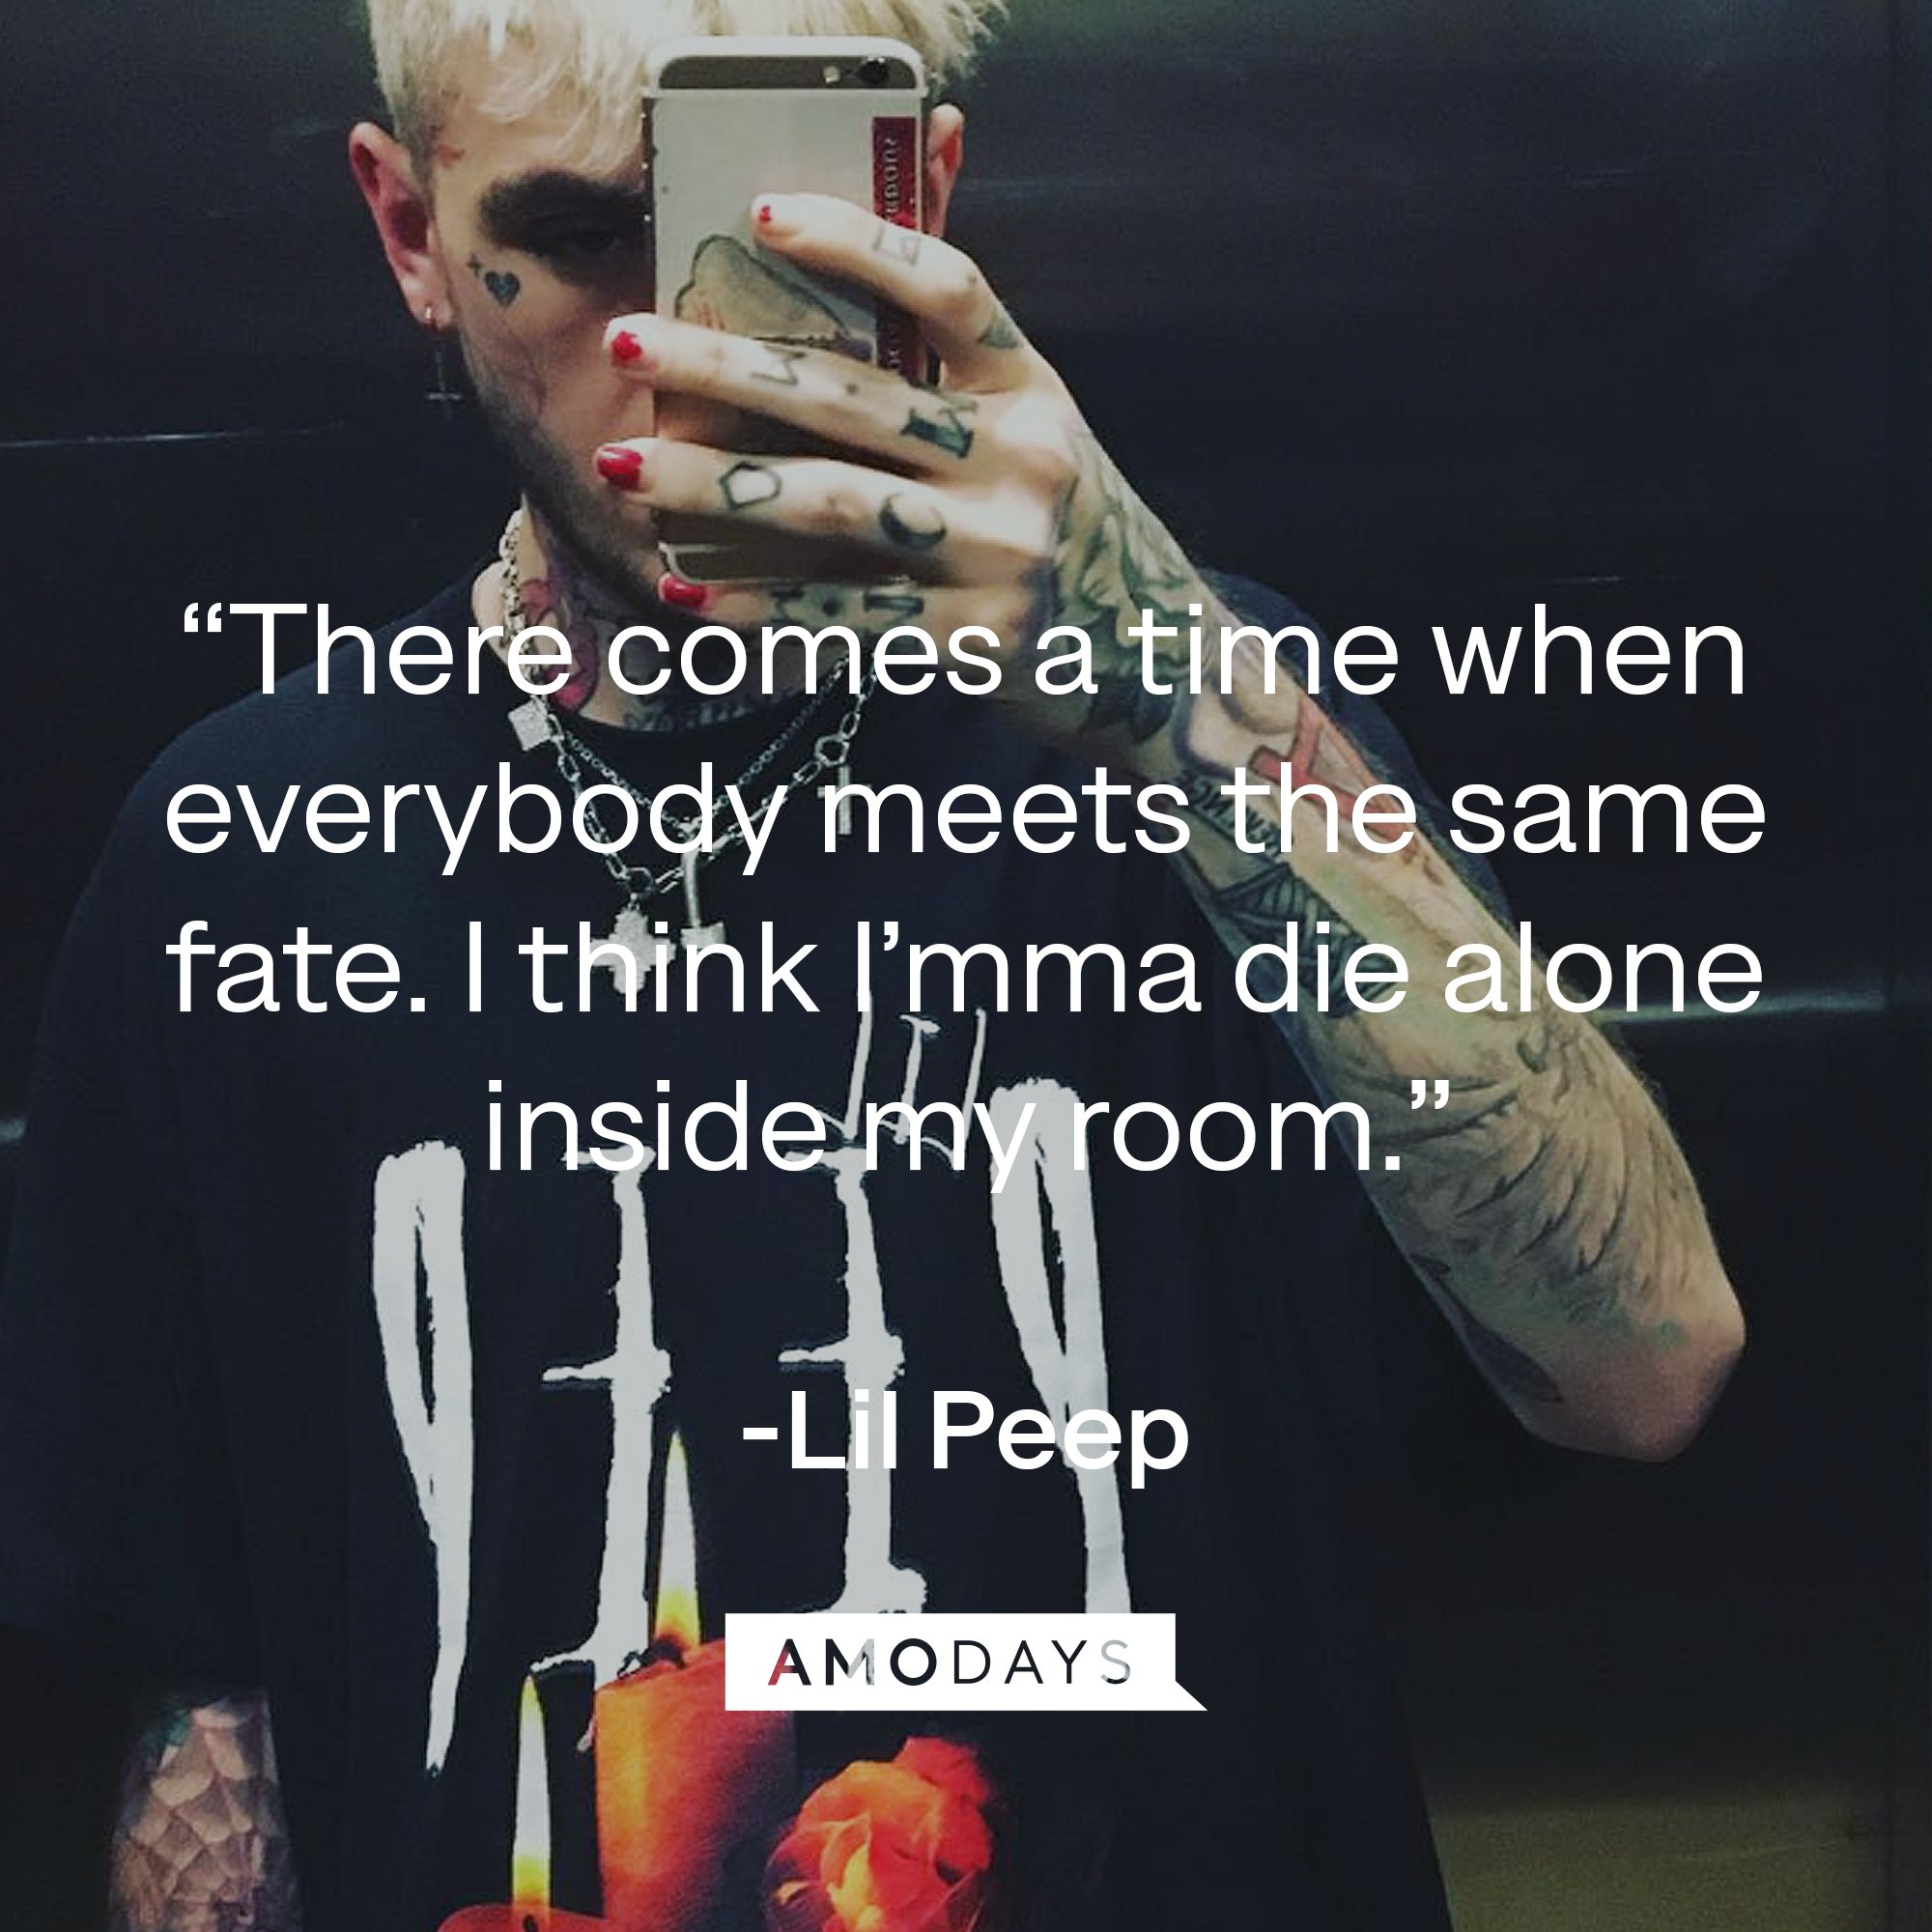 Lil Peep's quote: “There comes a time when everybody meets the same fate. I think I’mma die alone inside my room.” | Image: AmoDays